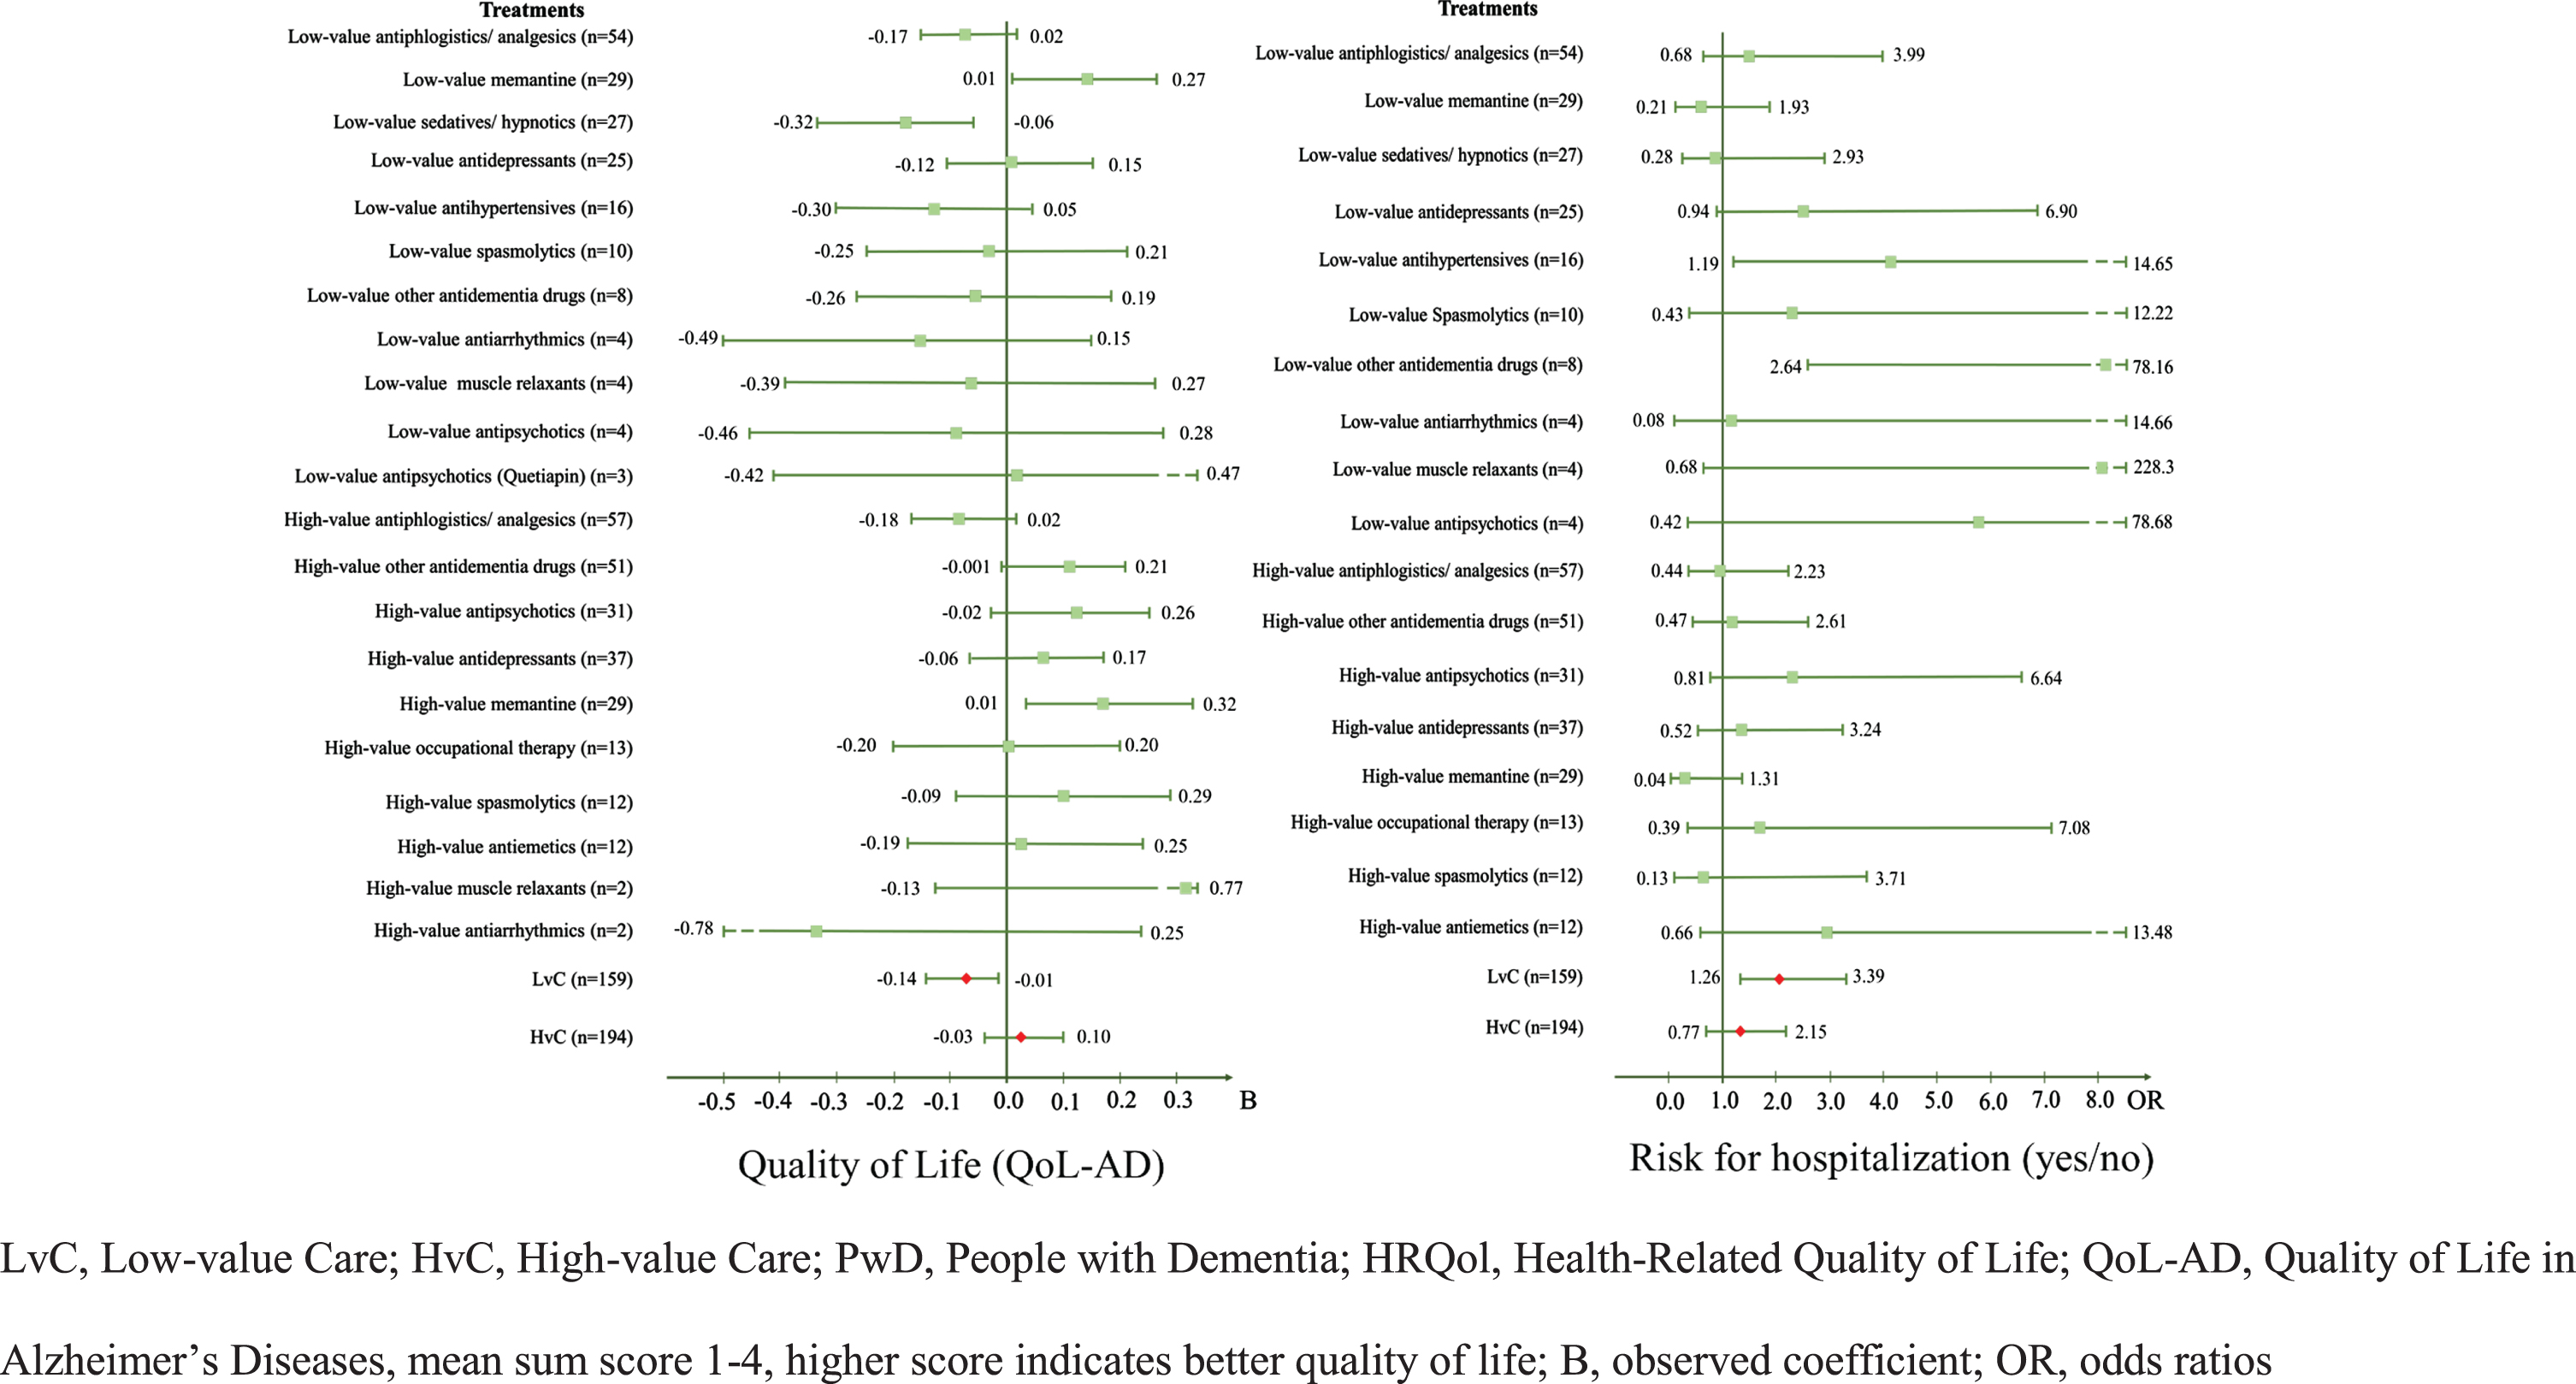 Forest plots for the associations between LvC and HvC and patient-centered outcomes of PwD –QoL-AD and Hospitalization.